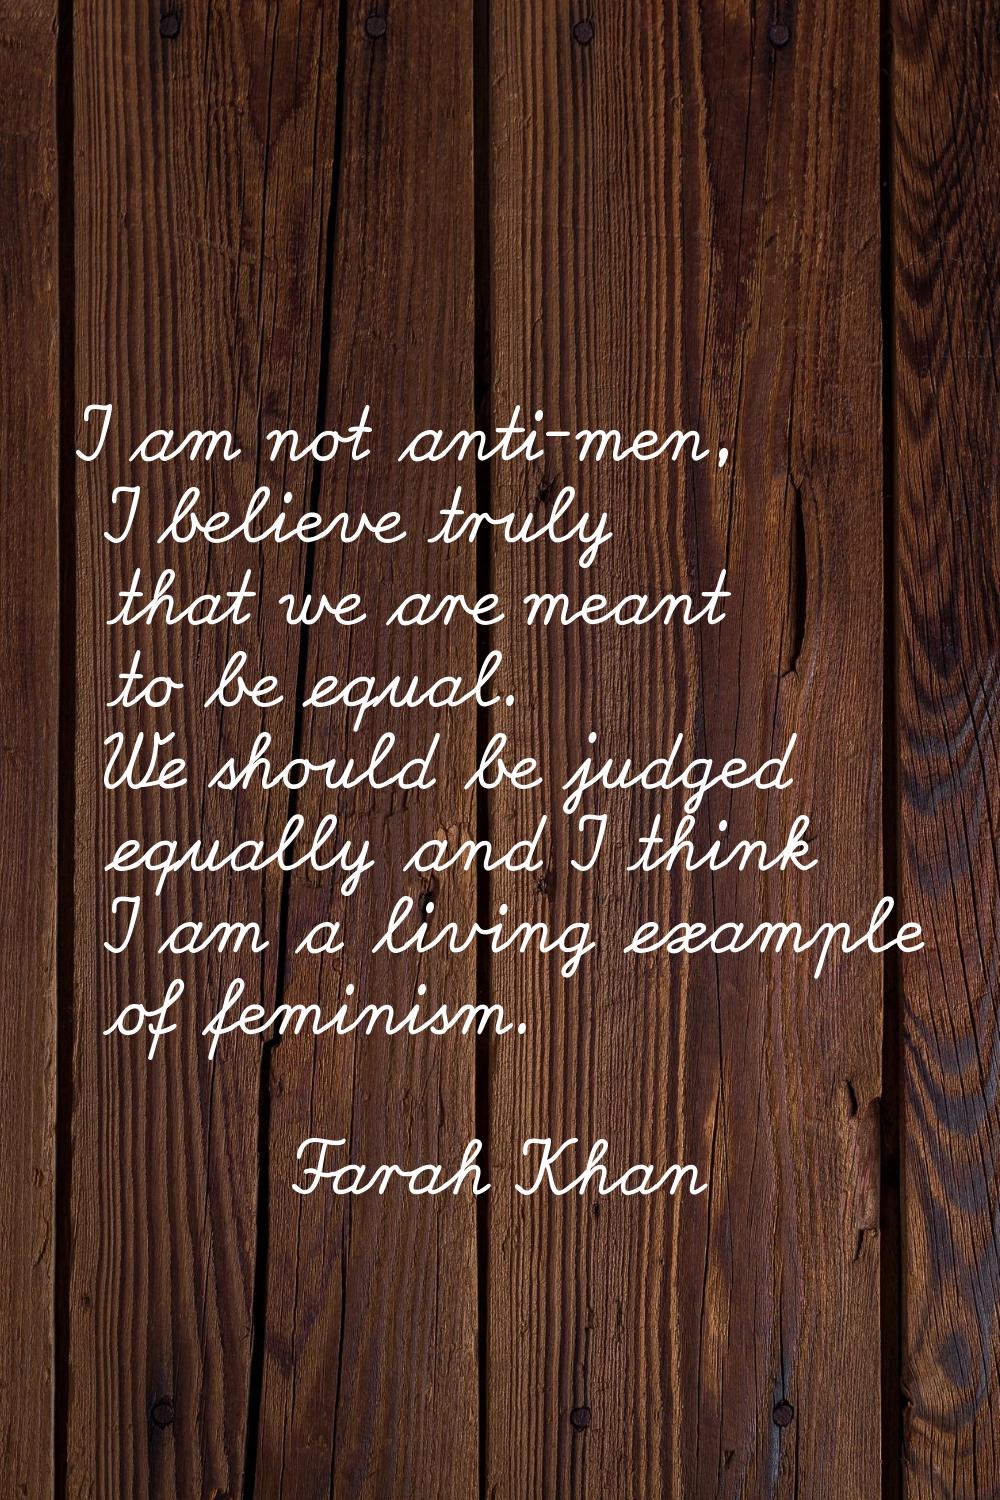 I am not anti-men, I believe truly that we are meant to be equal. We should be judged equally and I